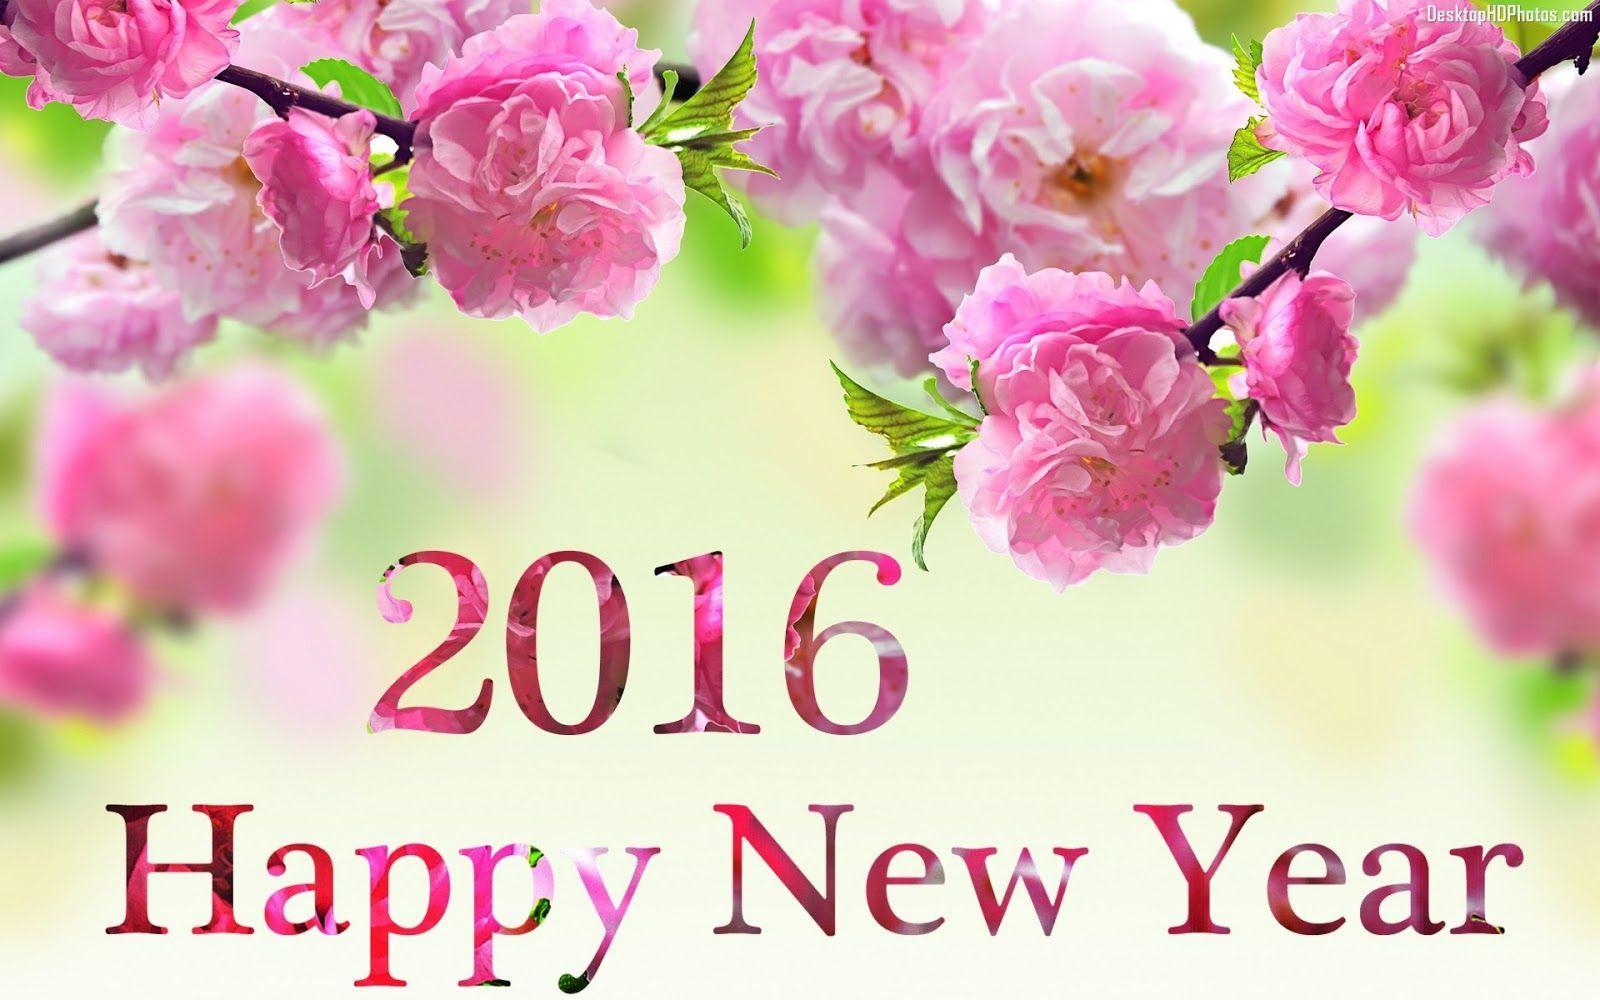 Happy New Year Messages 2016 & 2017 Wishes Image